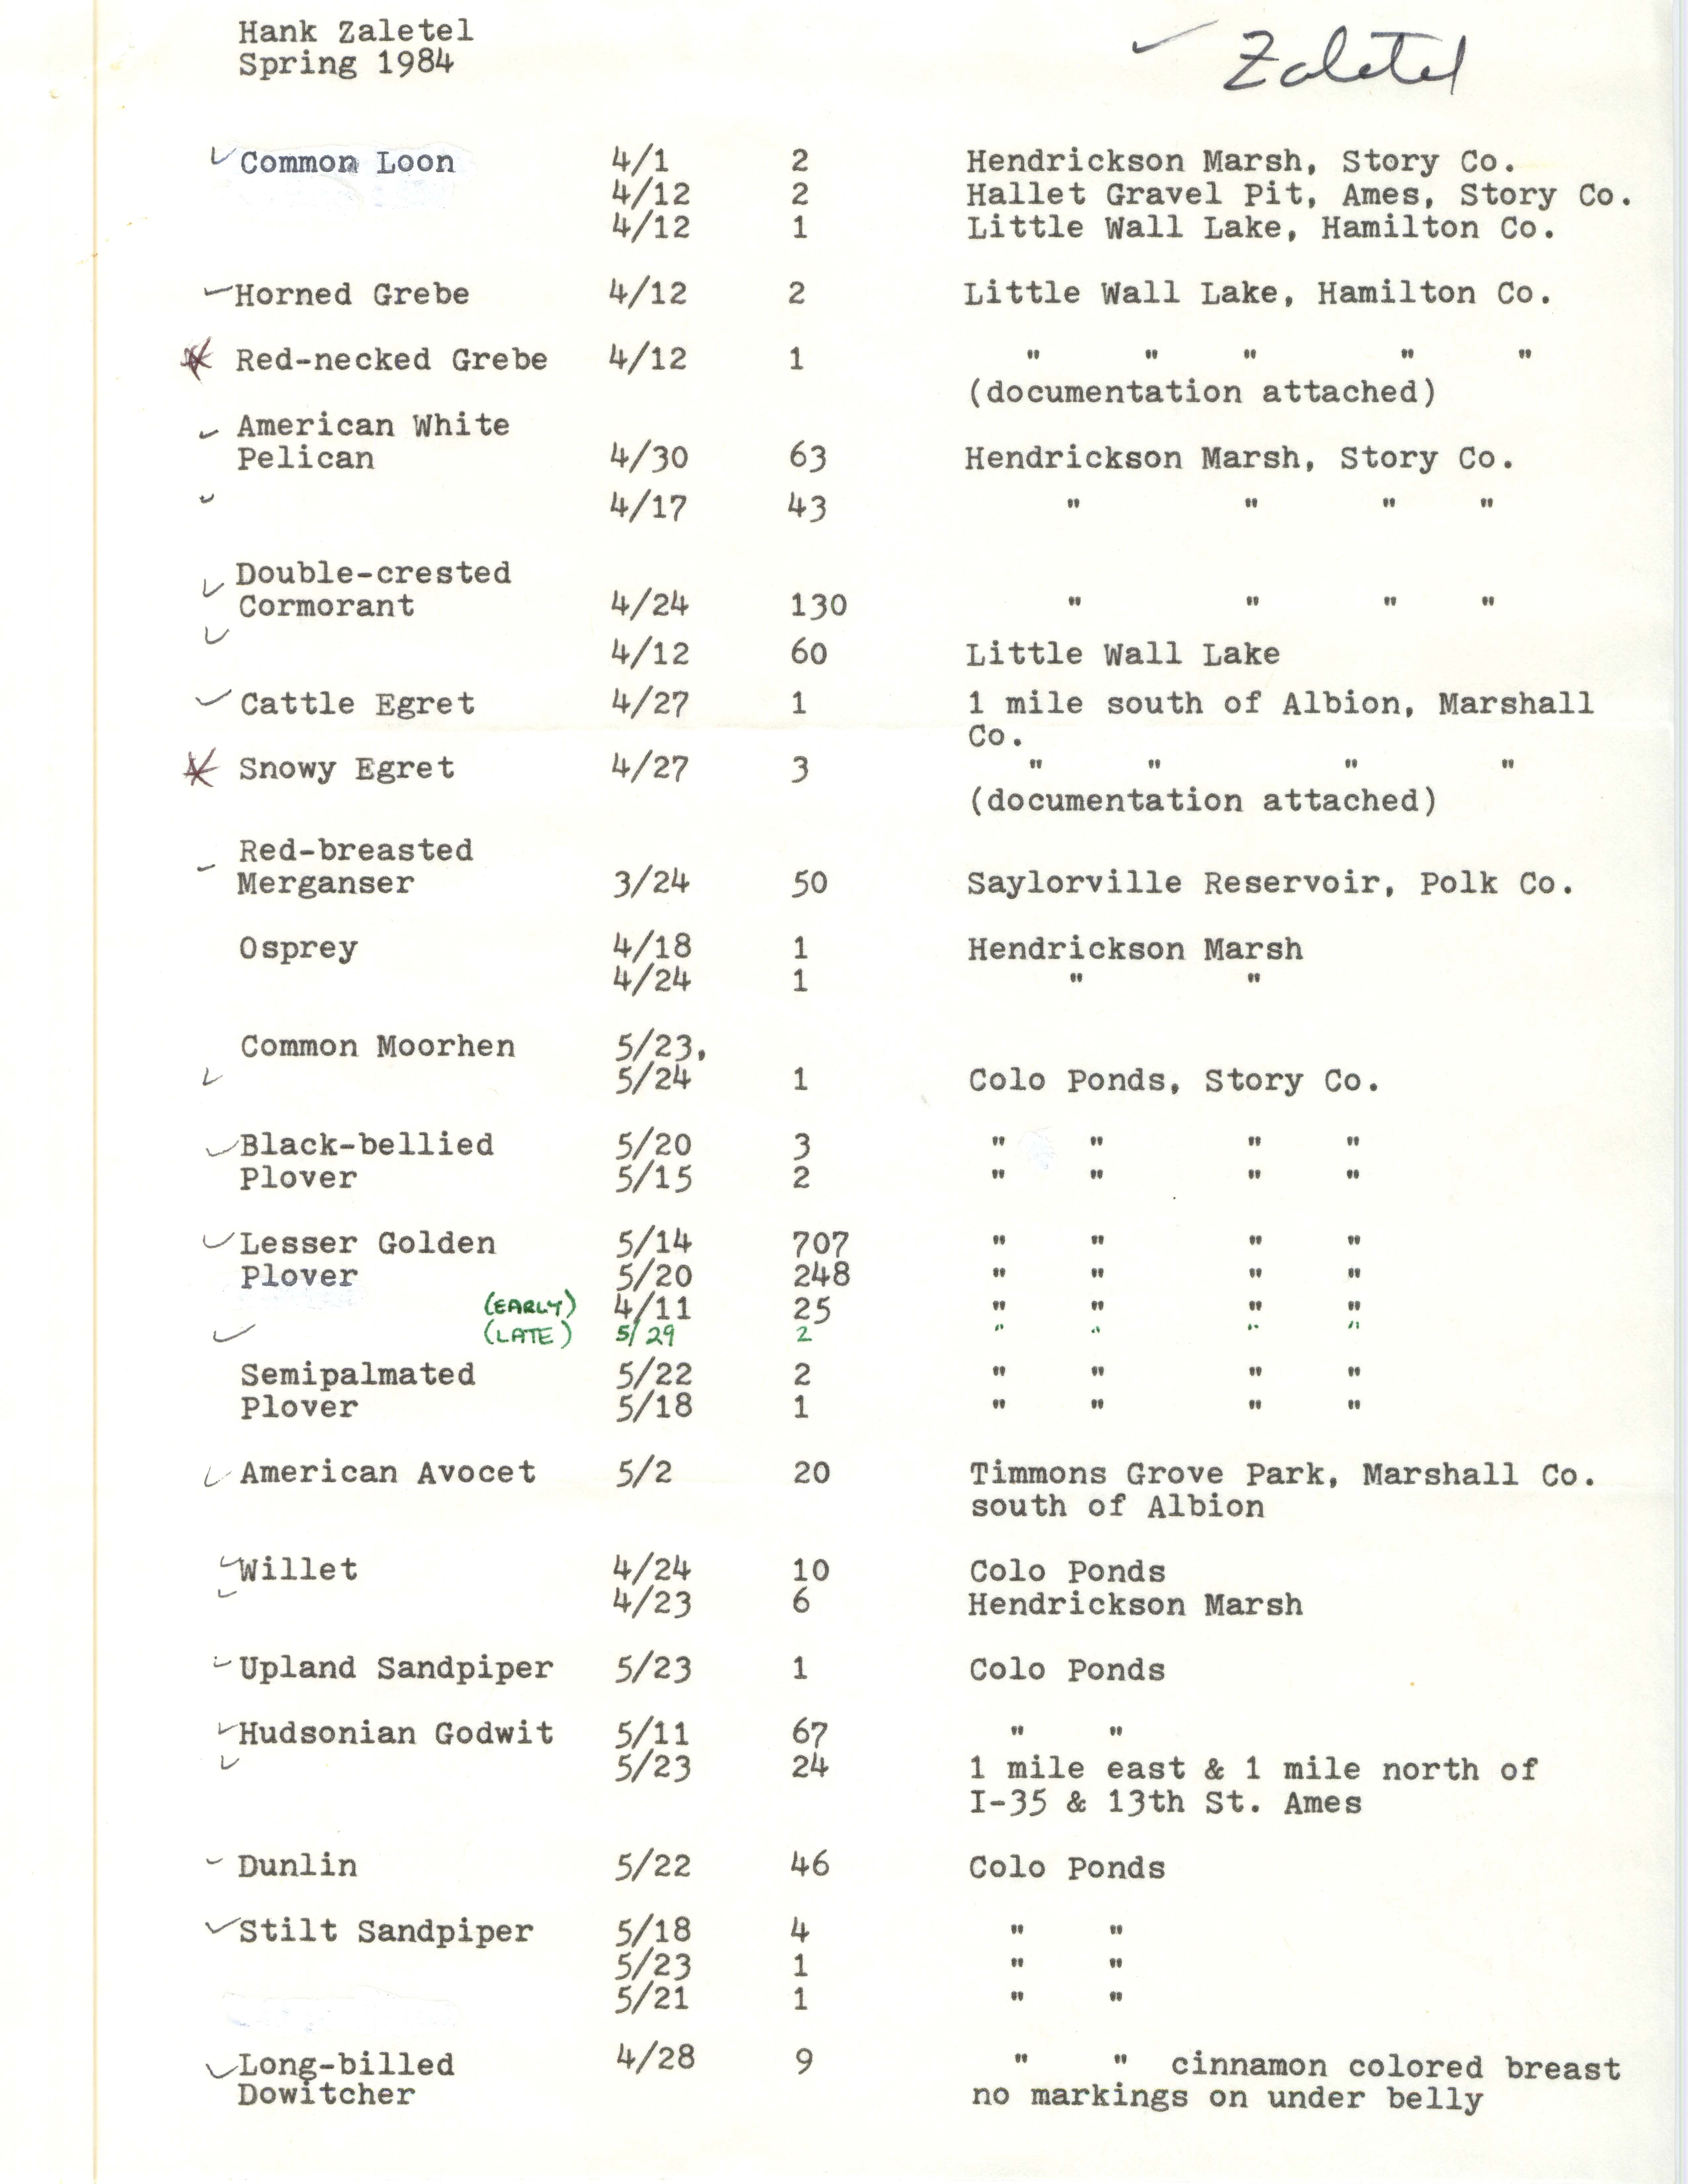 Field notes contributed by Hank Zaletel, spring 1984